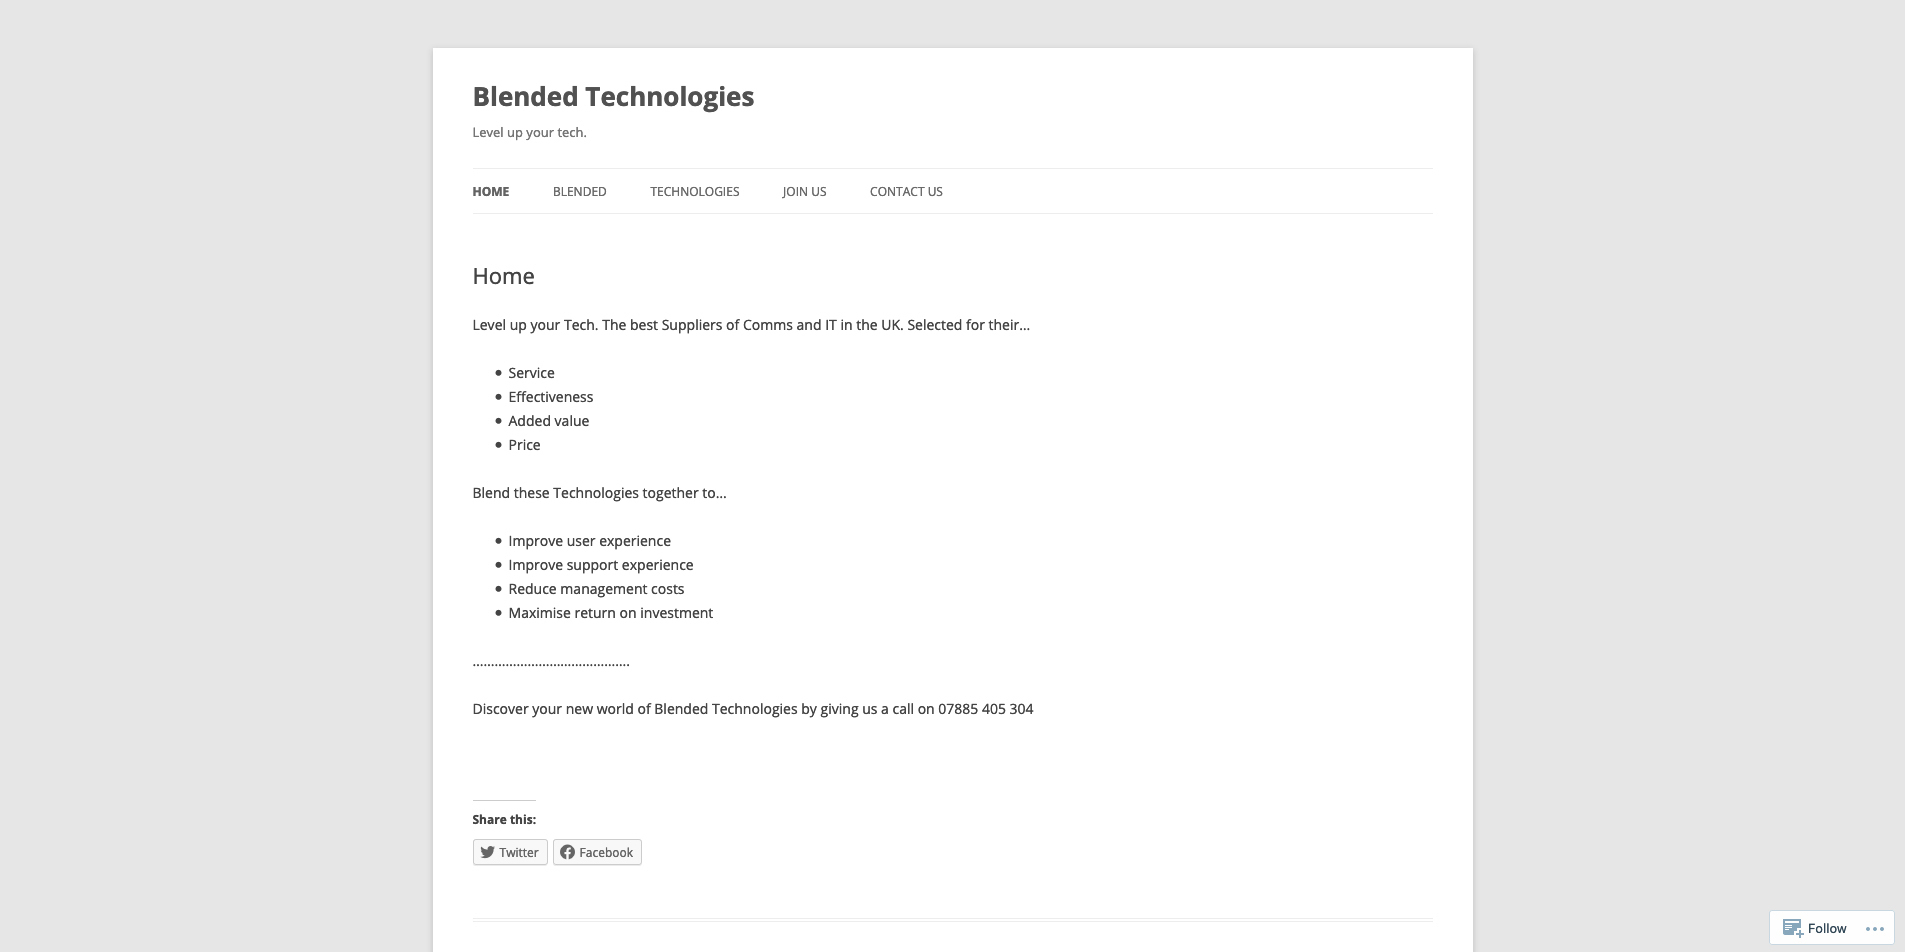 The previous Blended Technologies website design